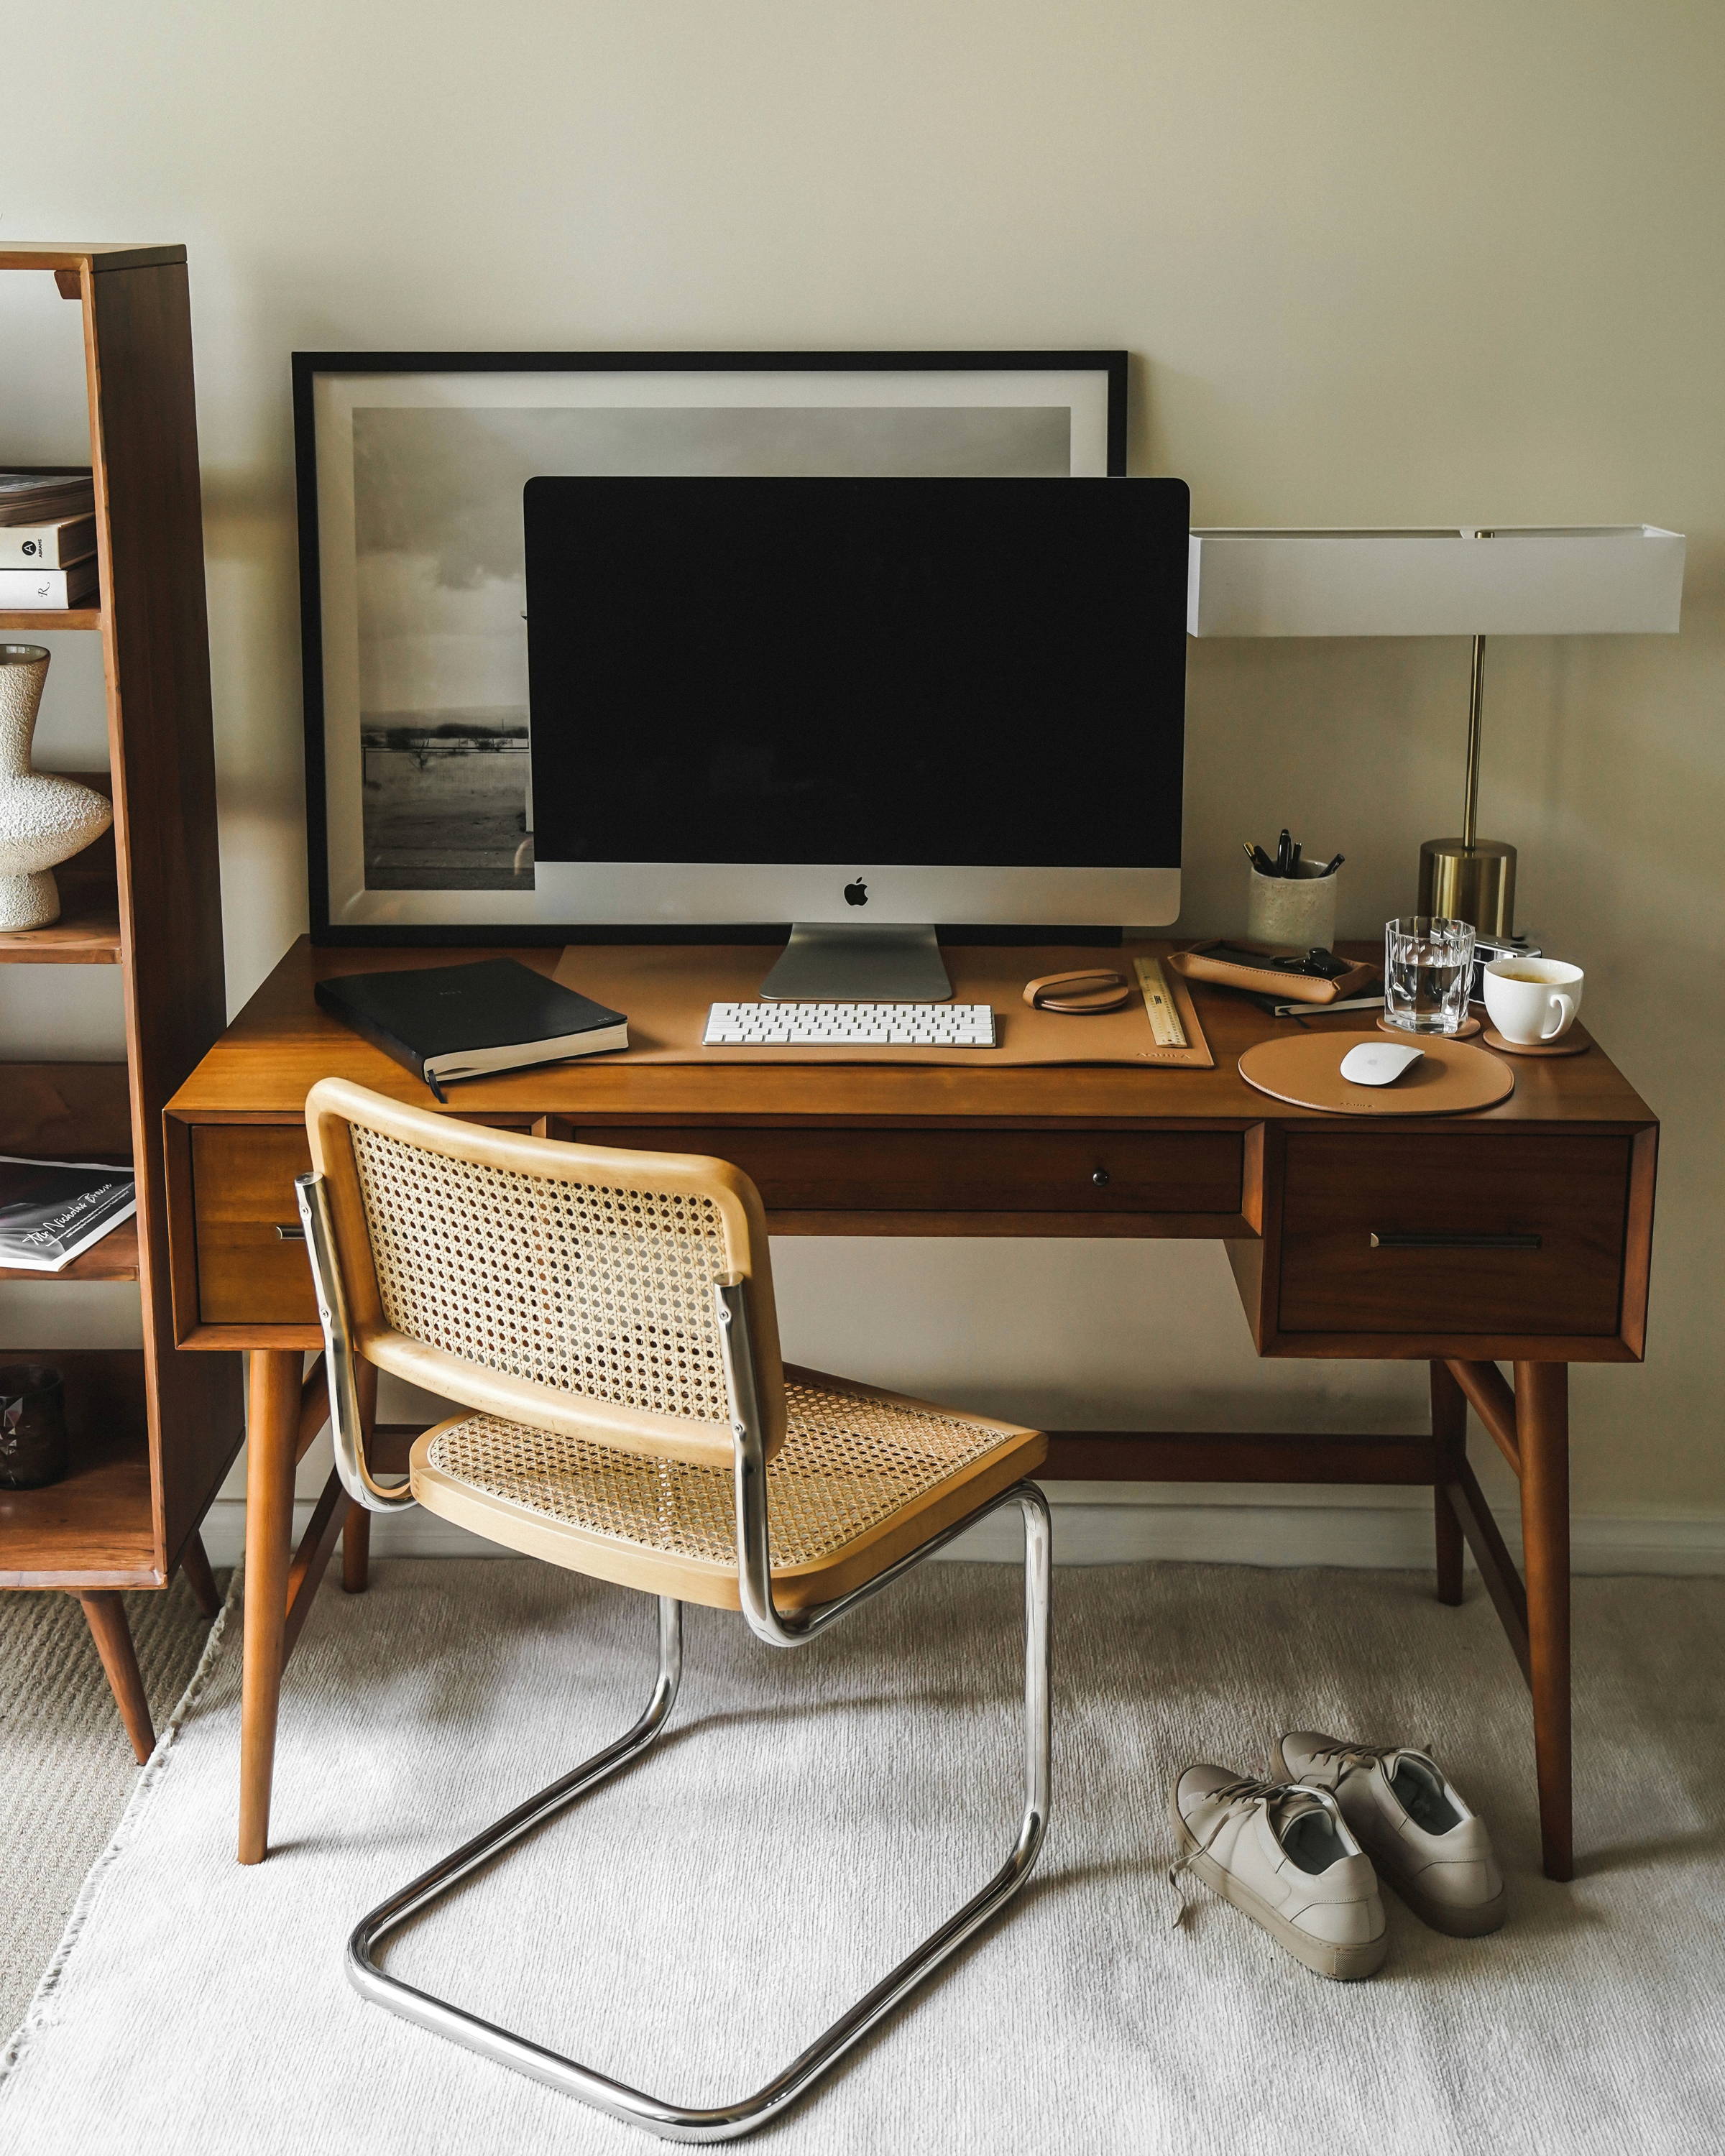 How to Create the Ultimate Home Office Setup